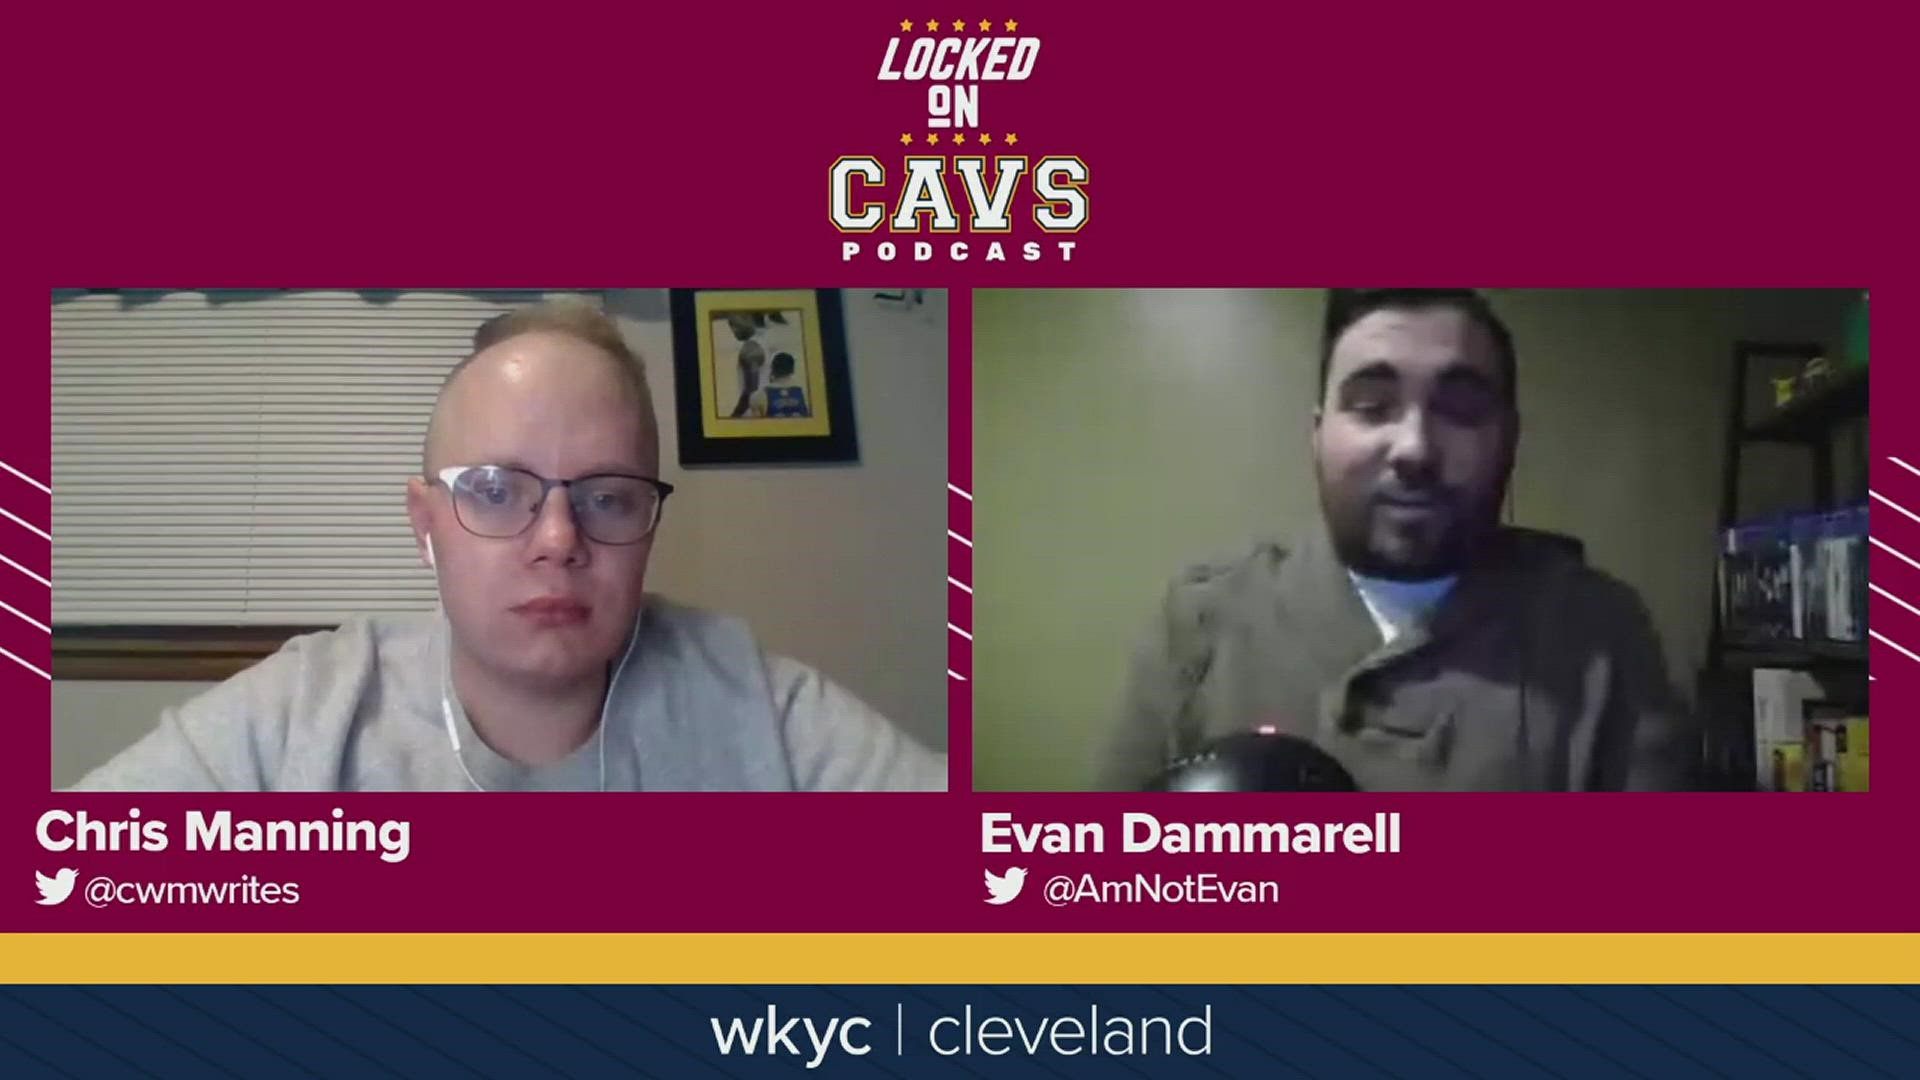 Locked on Cavs co-hosts Chris Manning and Evan Dammarell discuss an Andre Drummond extension and preview Cleveland's home opener against the Charlotte Hornets.